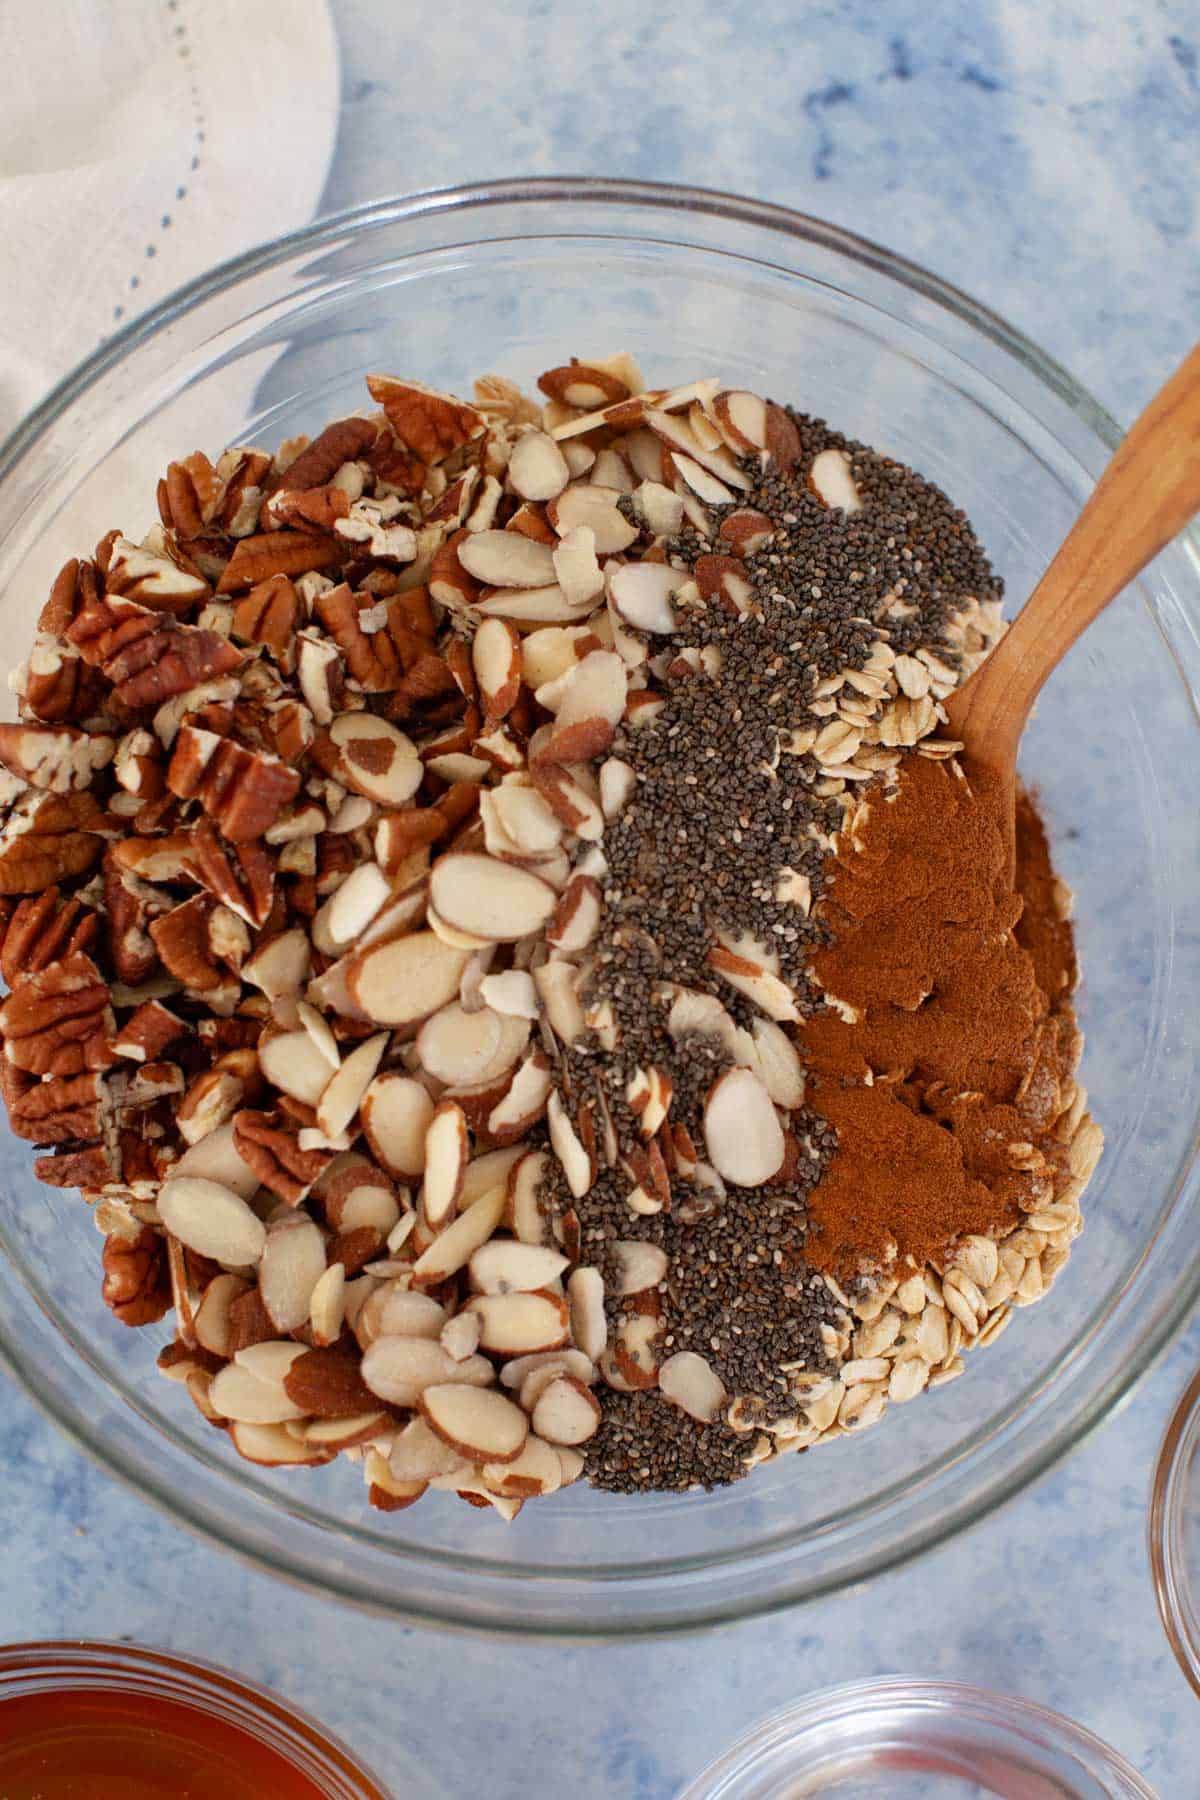 Oats, pecans, sliced almonds, chia seeds, and cinnamon in a glass bowl.